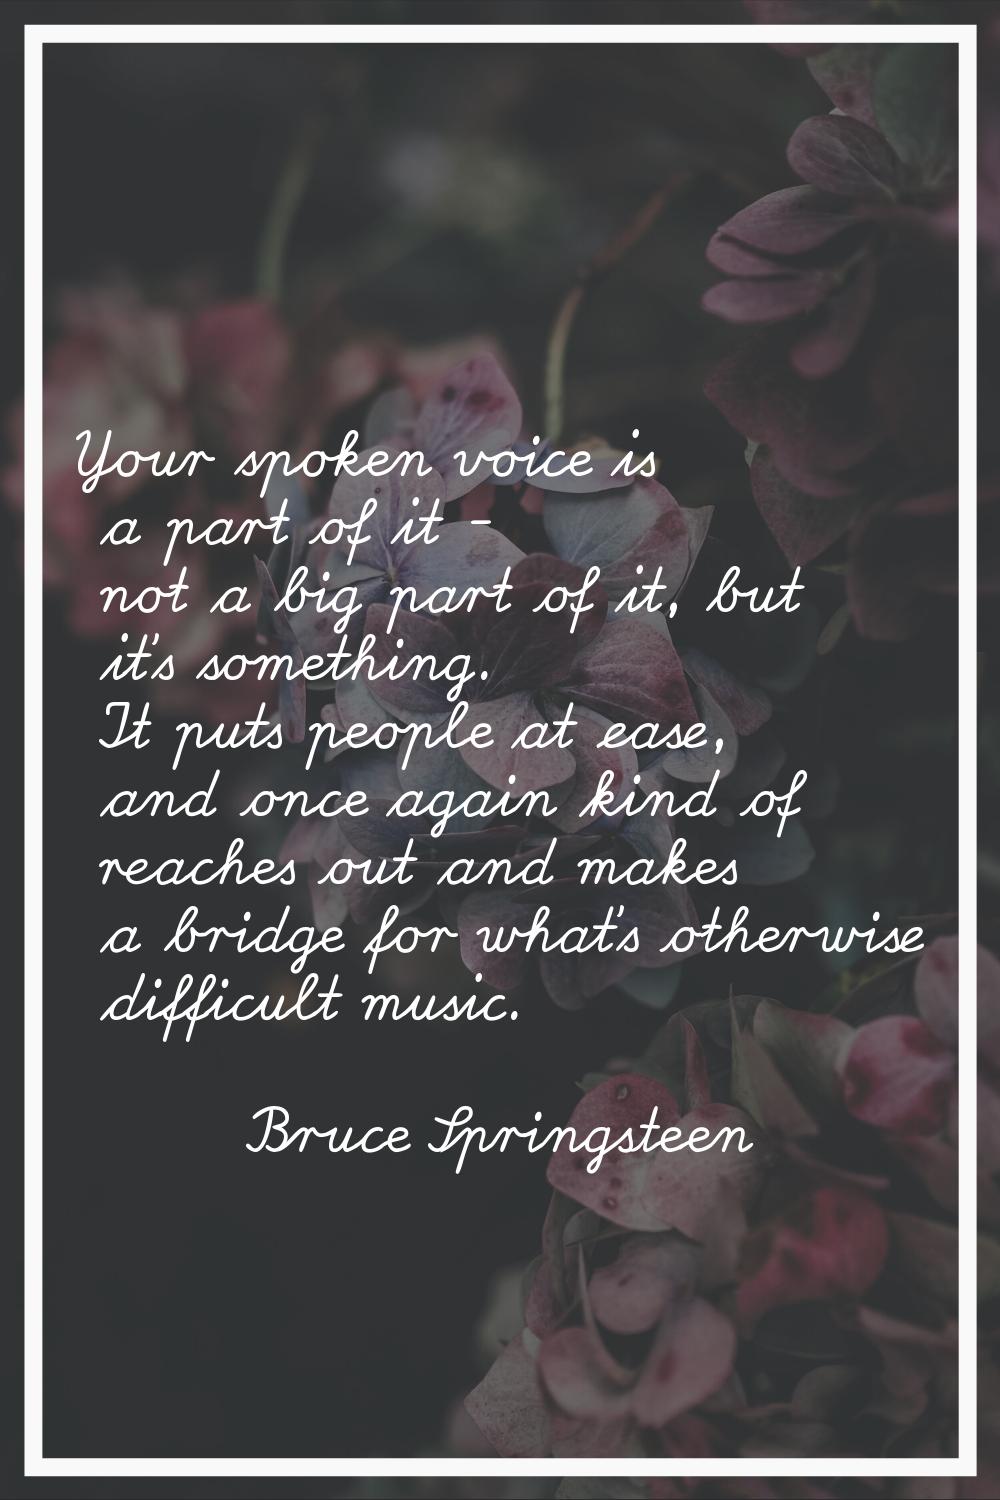 Your spoken voice is a part of it - not a big part of it, but it's something. It puts people at eas